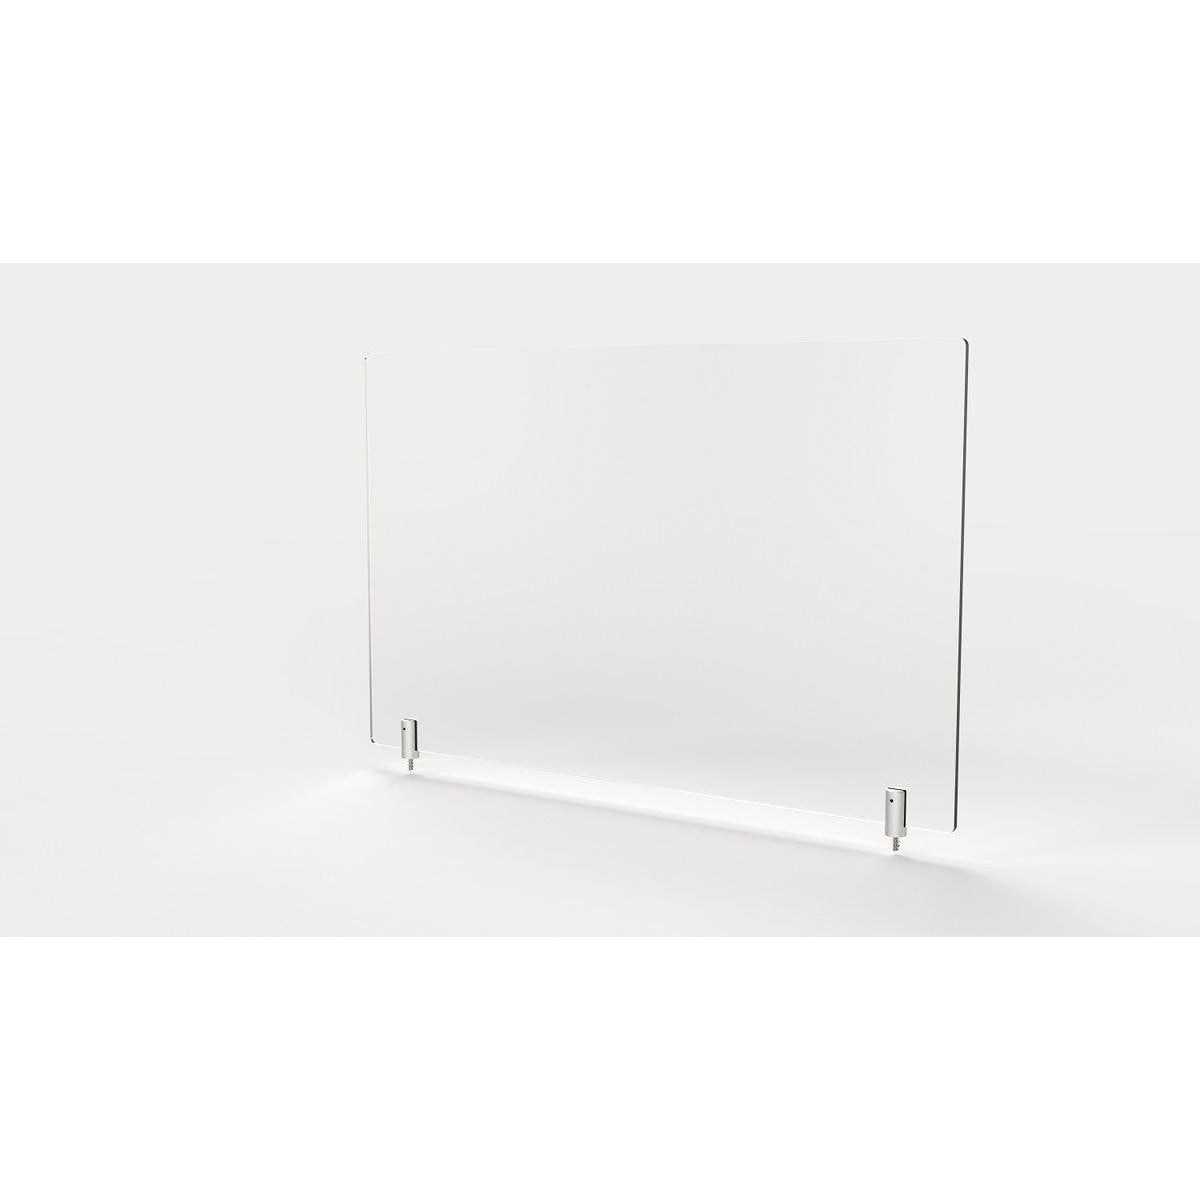 Frosted Thermoplastic Partition & Cubicle Extender with Permanent Screw Attachment, 24"H x 24"W